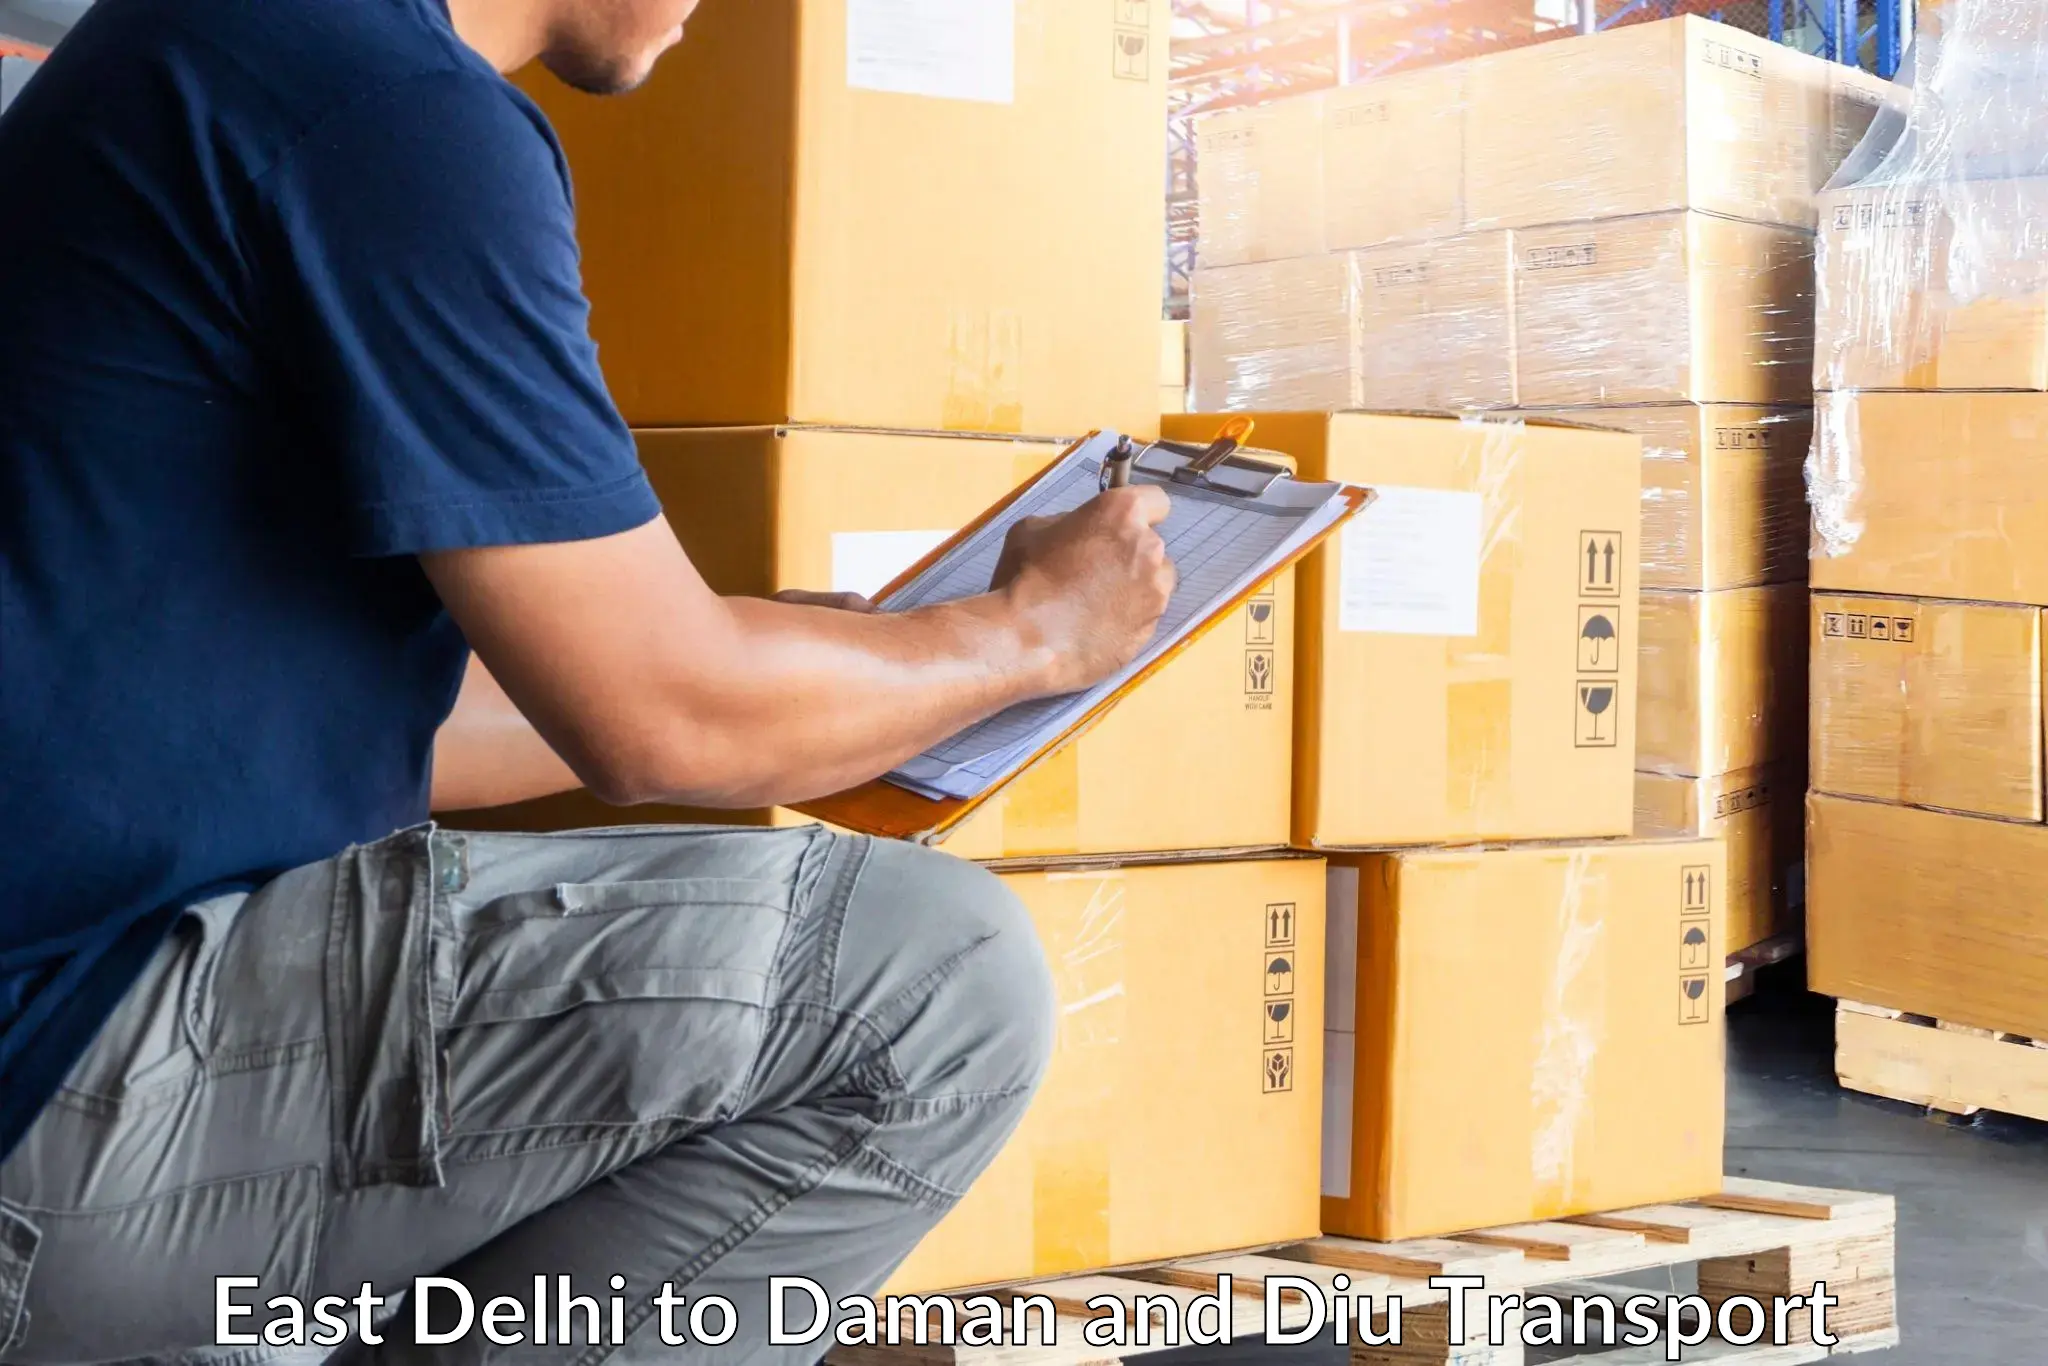 Container transport service East Delhi to Daman